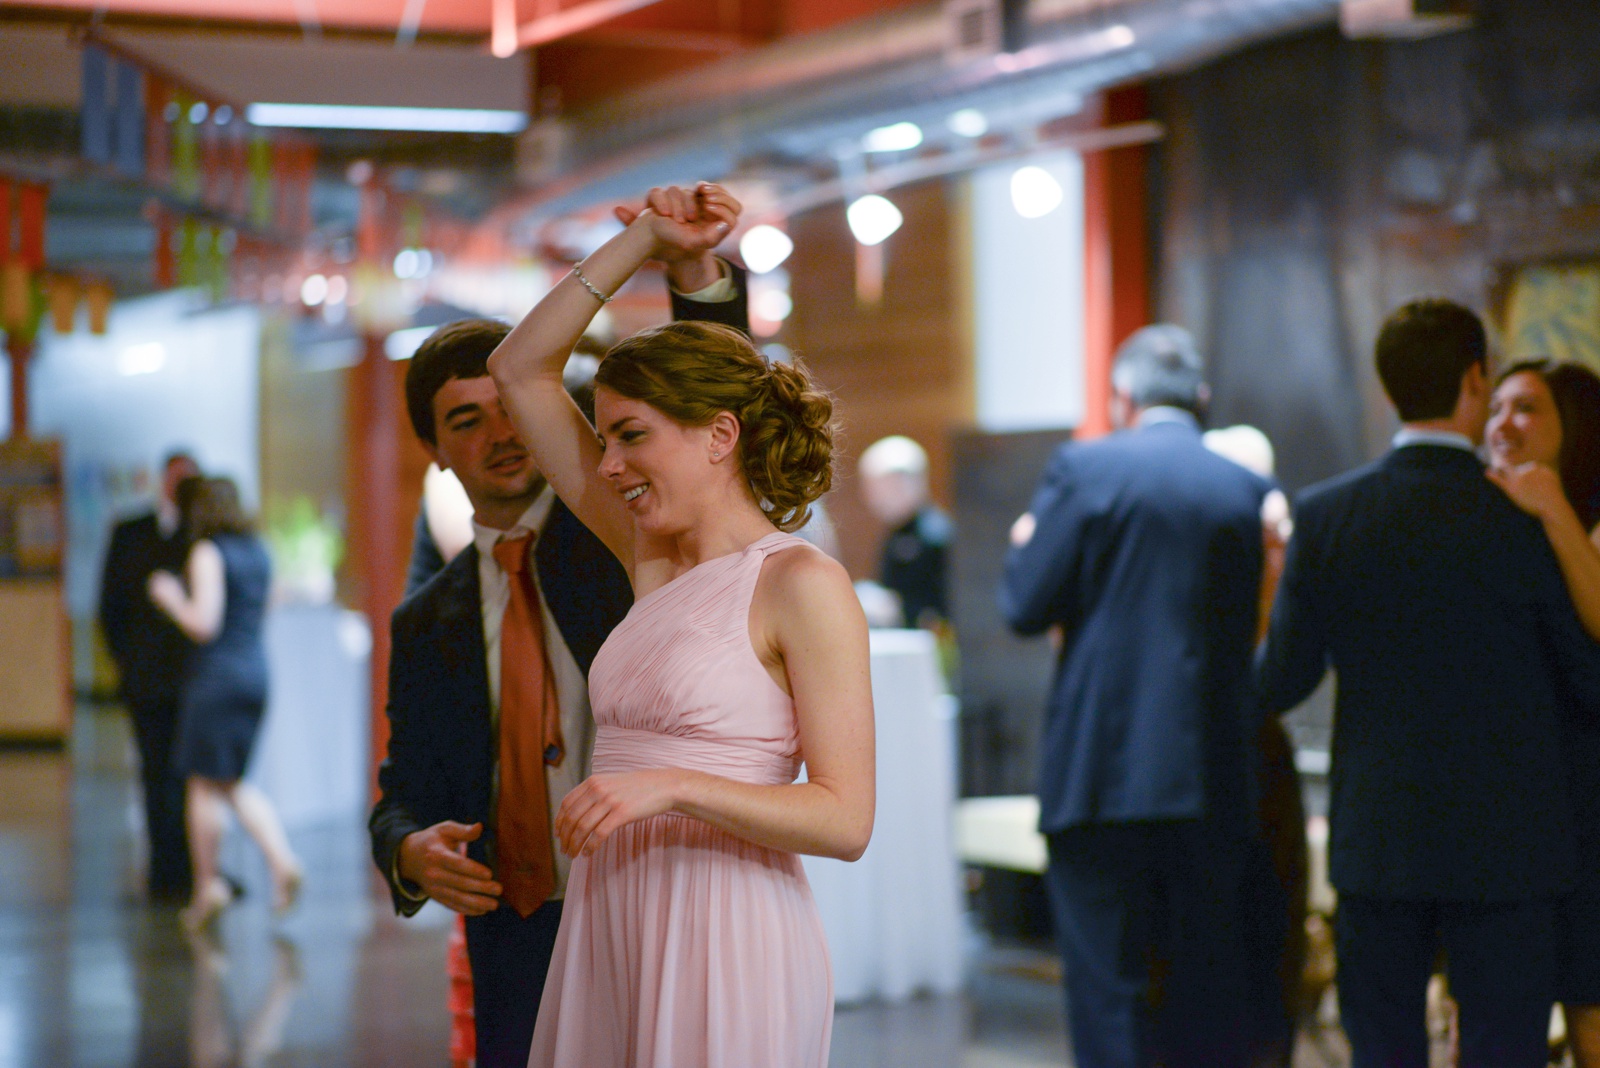 twirling-dance-at-a-wedding